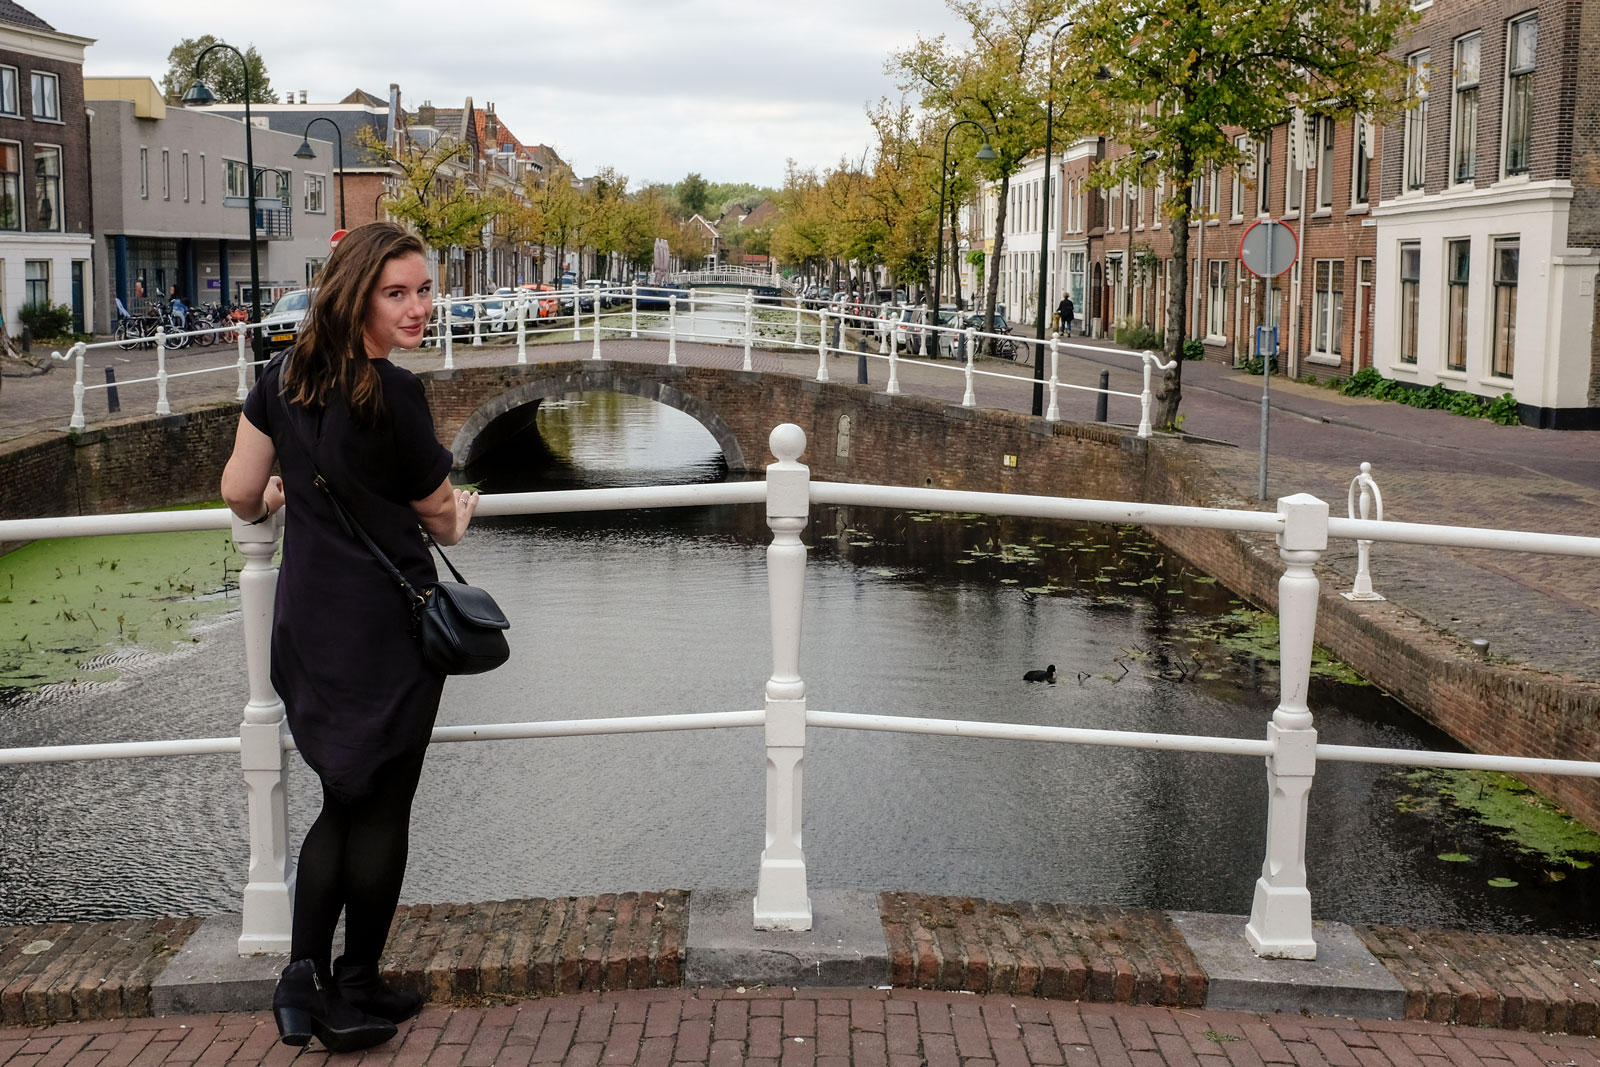 Alyssa stands in front of a Delft canal wearing a black dress, boots, and tights